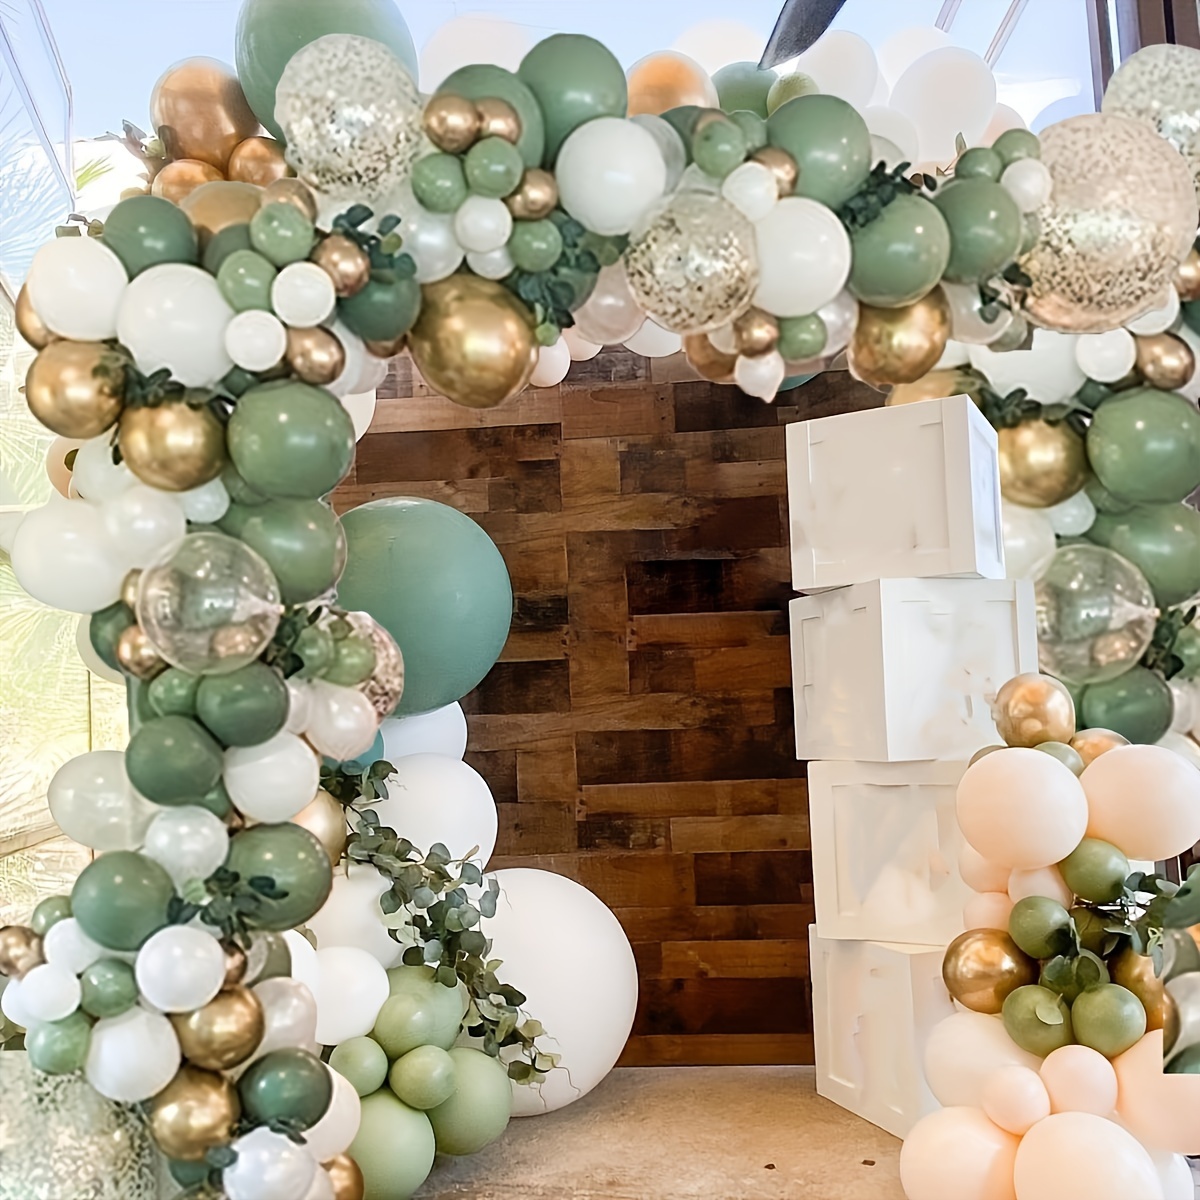 

139pcs, Sage Green Balloon Garland Arch Kit Decor With Olive Green White Golden Double- Olive Matte Different Sizes Decor Balloon For Jungle Woodland Safari Birthday Party Decorations Easter Gift